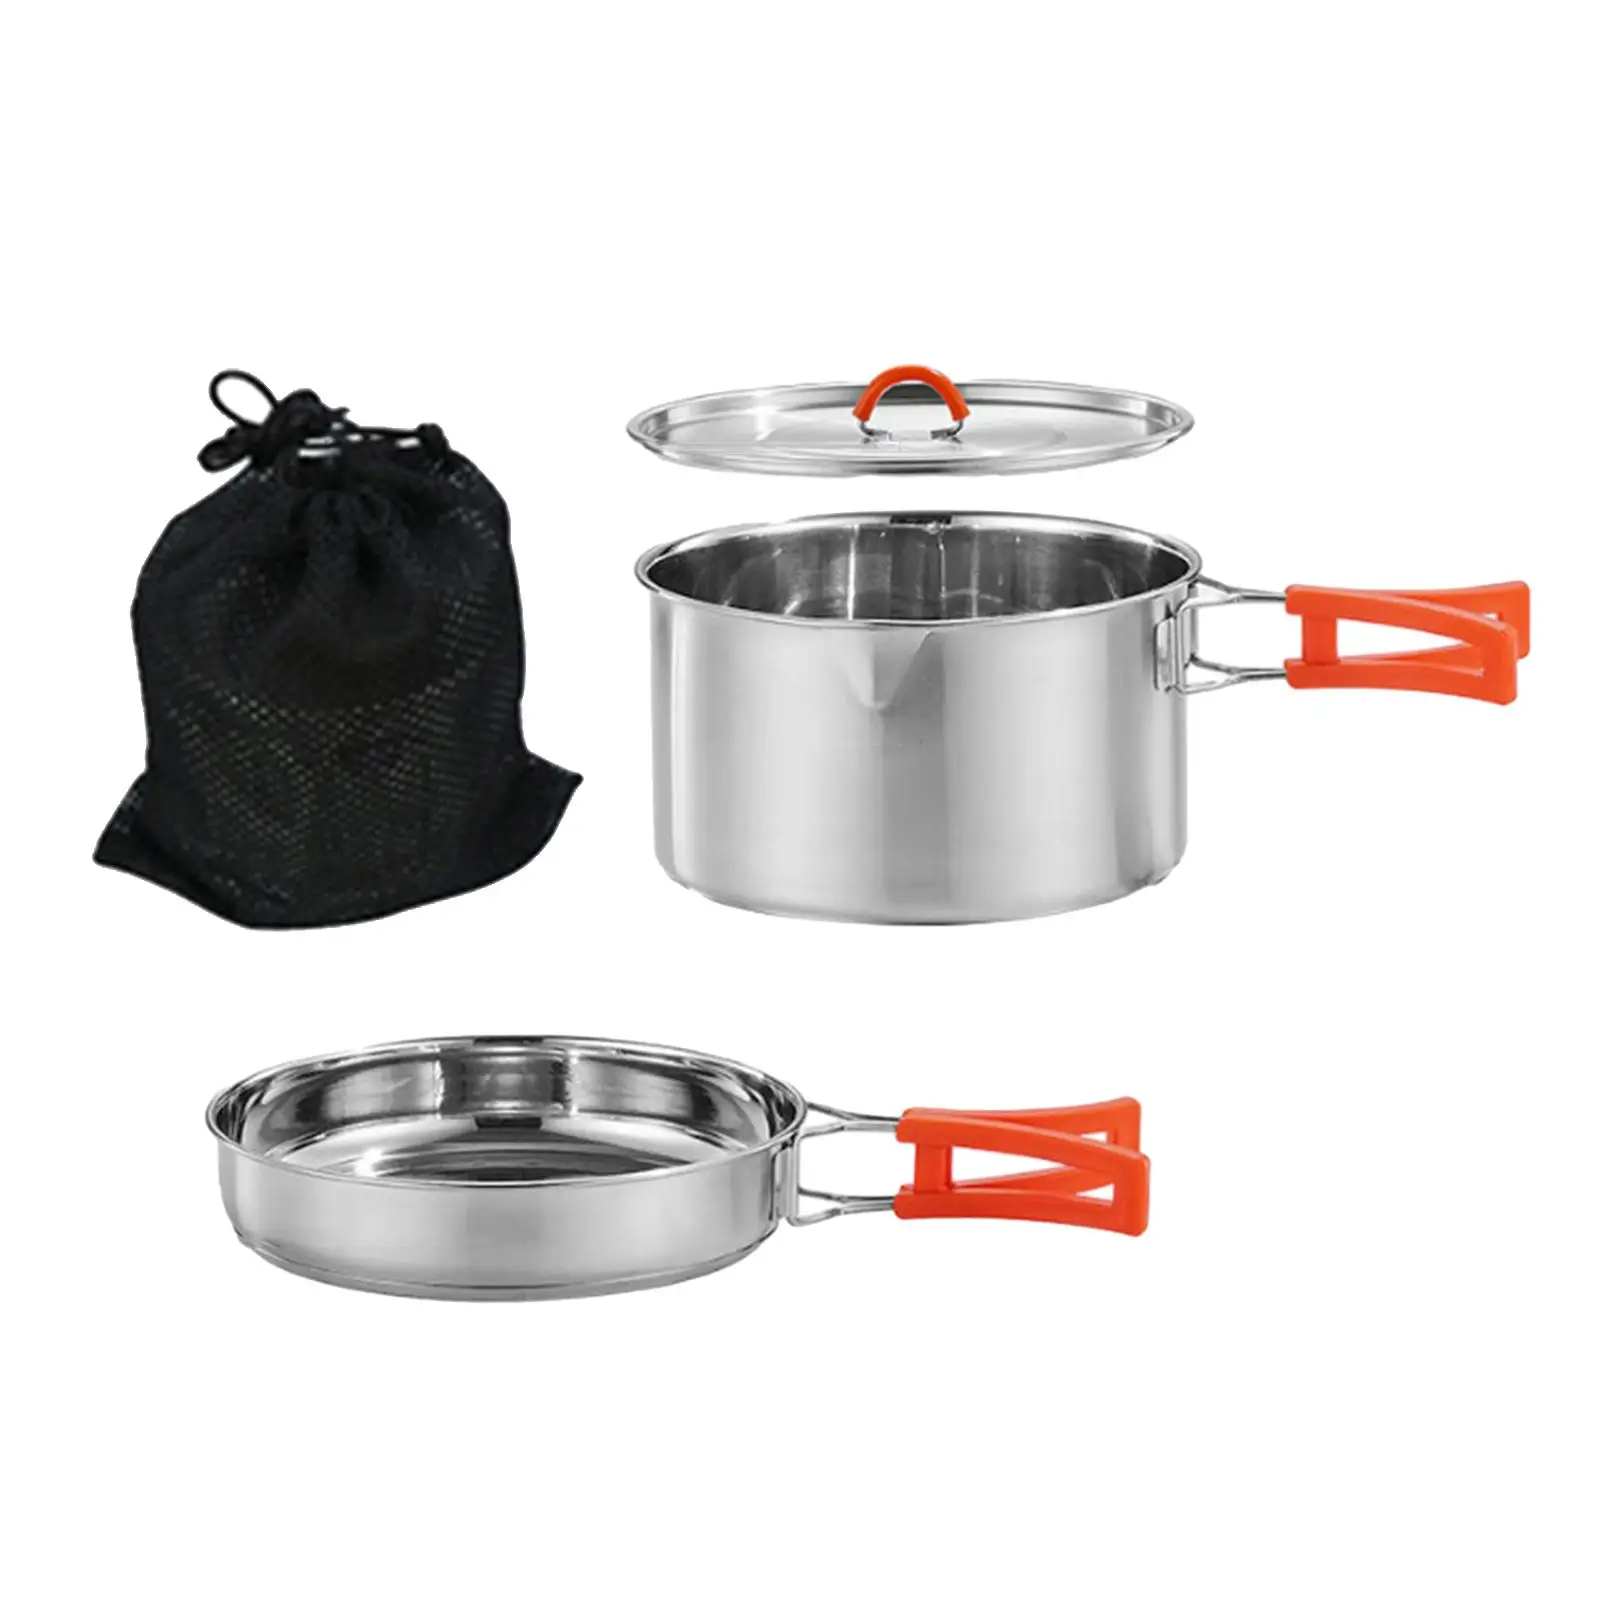 Camping Cookware with Folding Handles Lightweight with Mesh Carry Bag for Camp Picnic Hiking Backpacking Camping Accessories